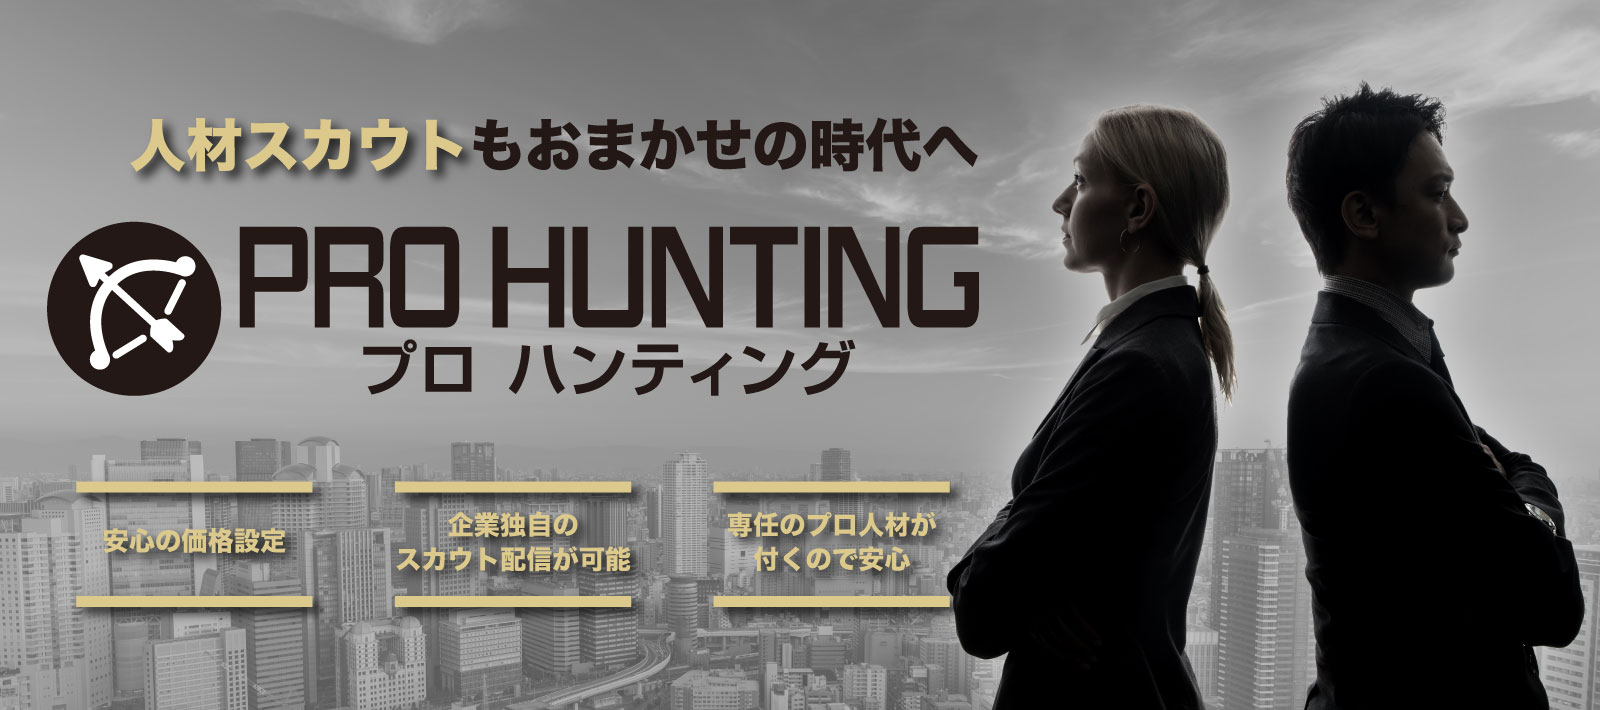 prohunting_banner